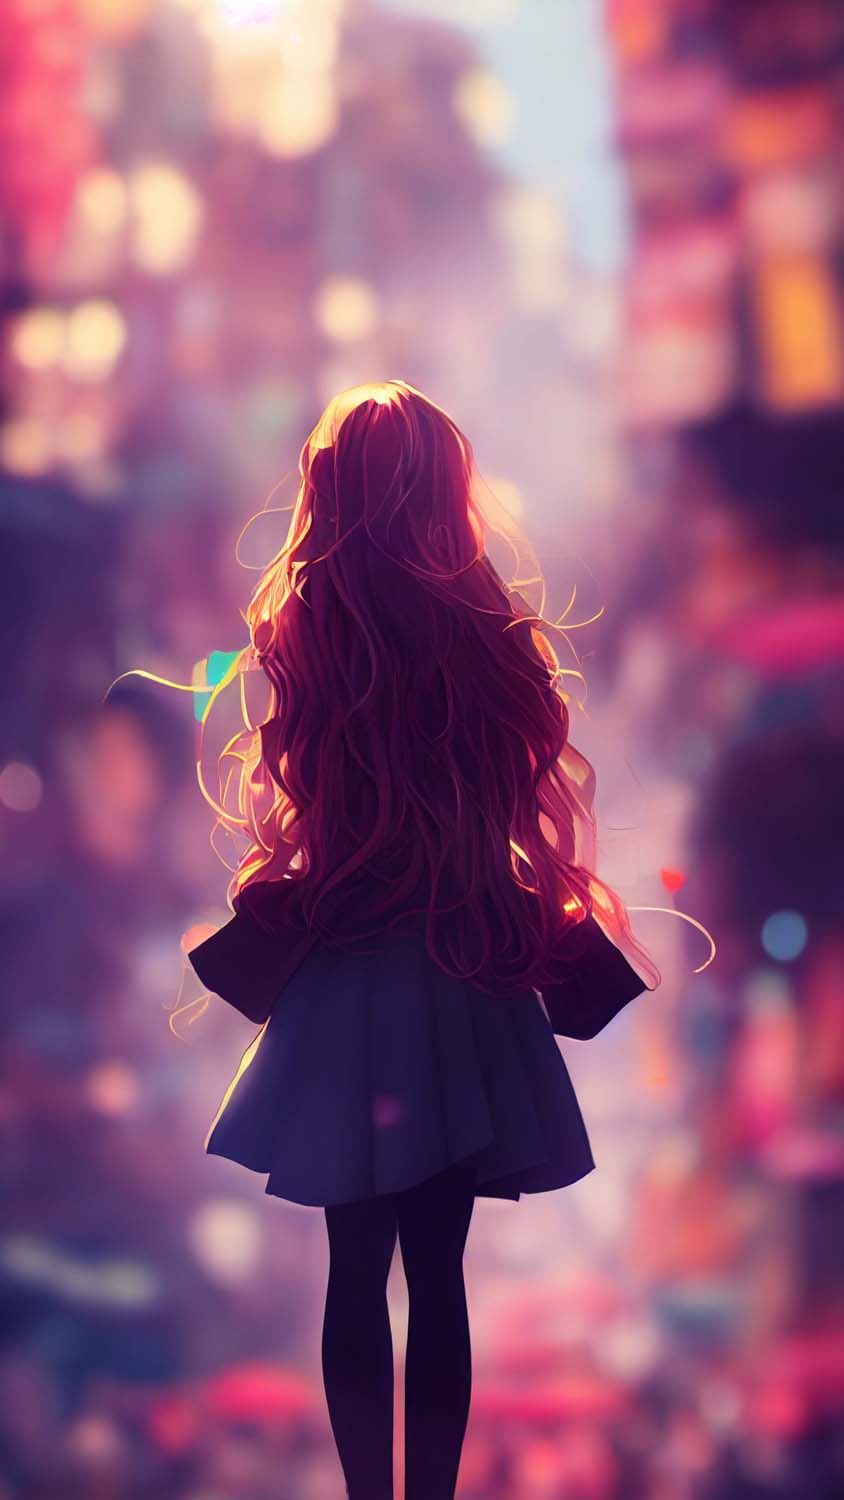 A Girl with Flowers Wallpaper  Girl Aesthetic Wallpaper for iPhone